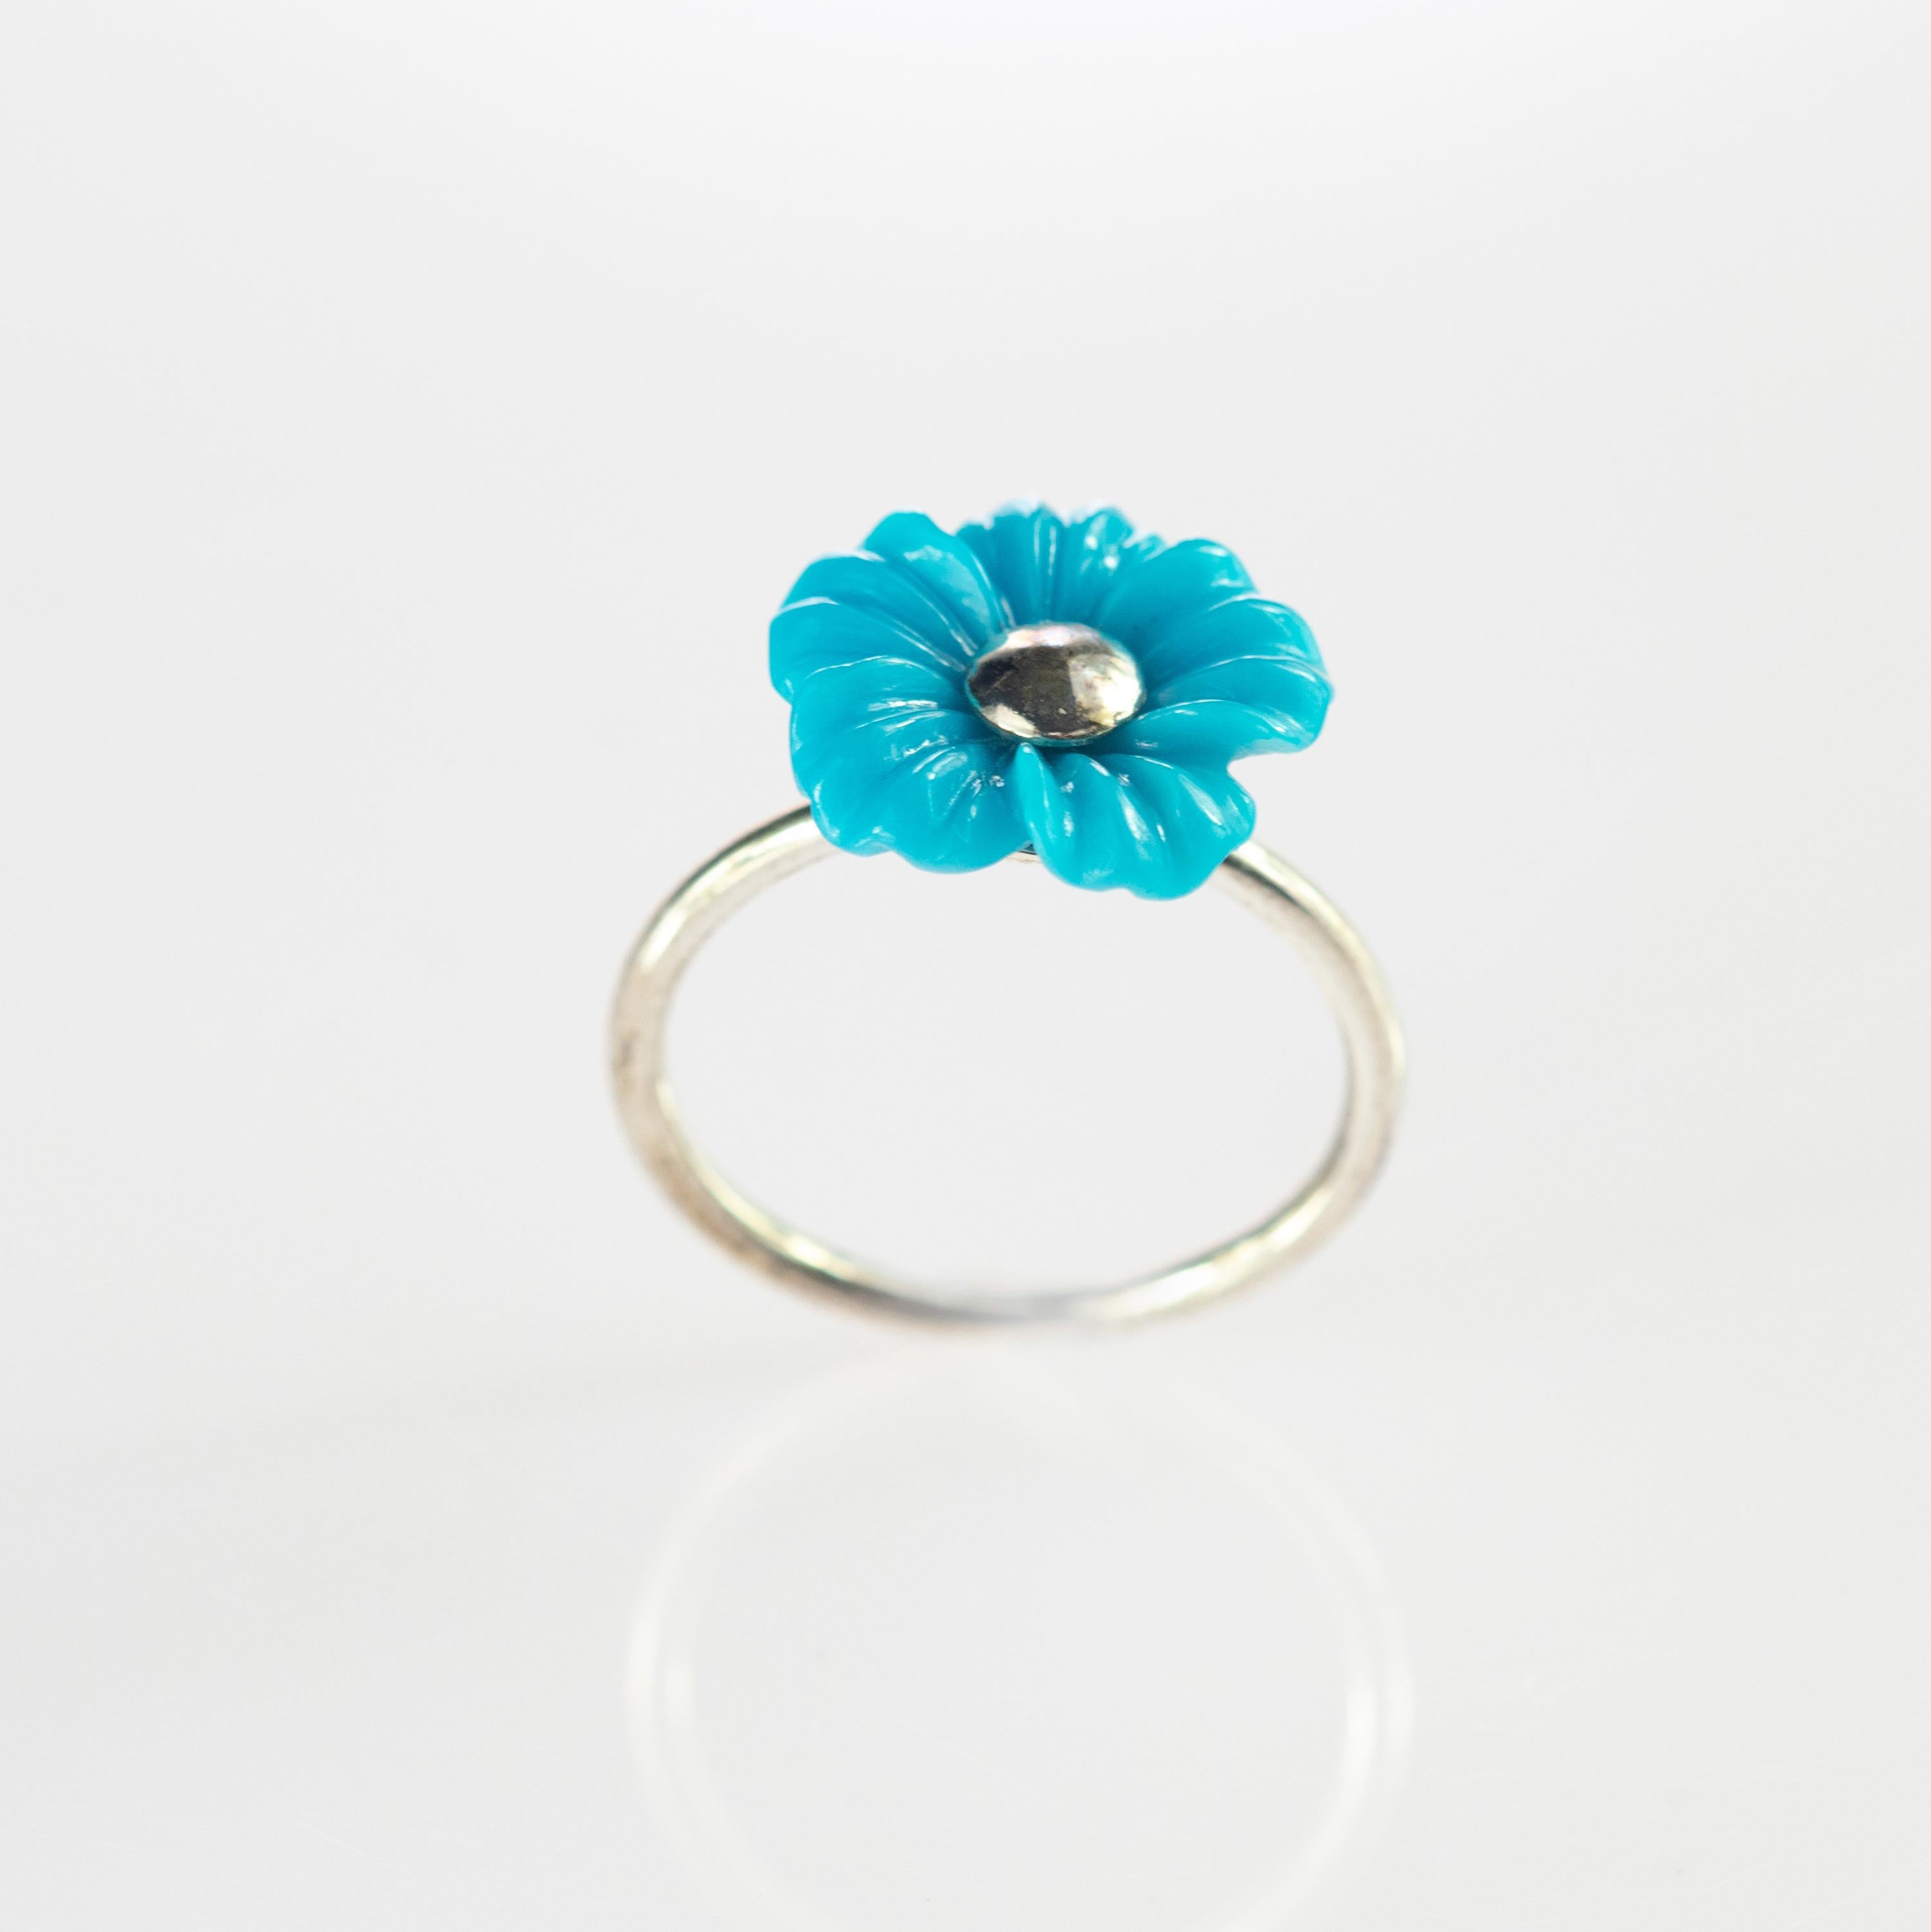 Astonishing natural turquoise ring with a graceful design full of color and happiness. Carved petals that evoke the italian handmade traditional jewelry work. Flirtatious pattern full of color and elegance. 

Beautiful and delicate design that